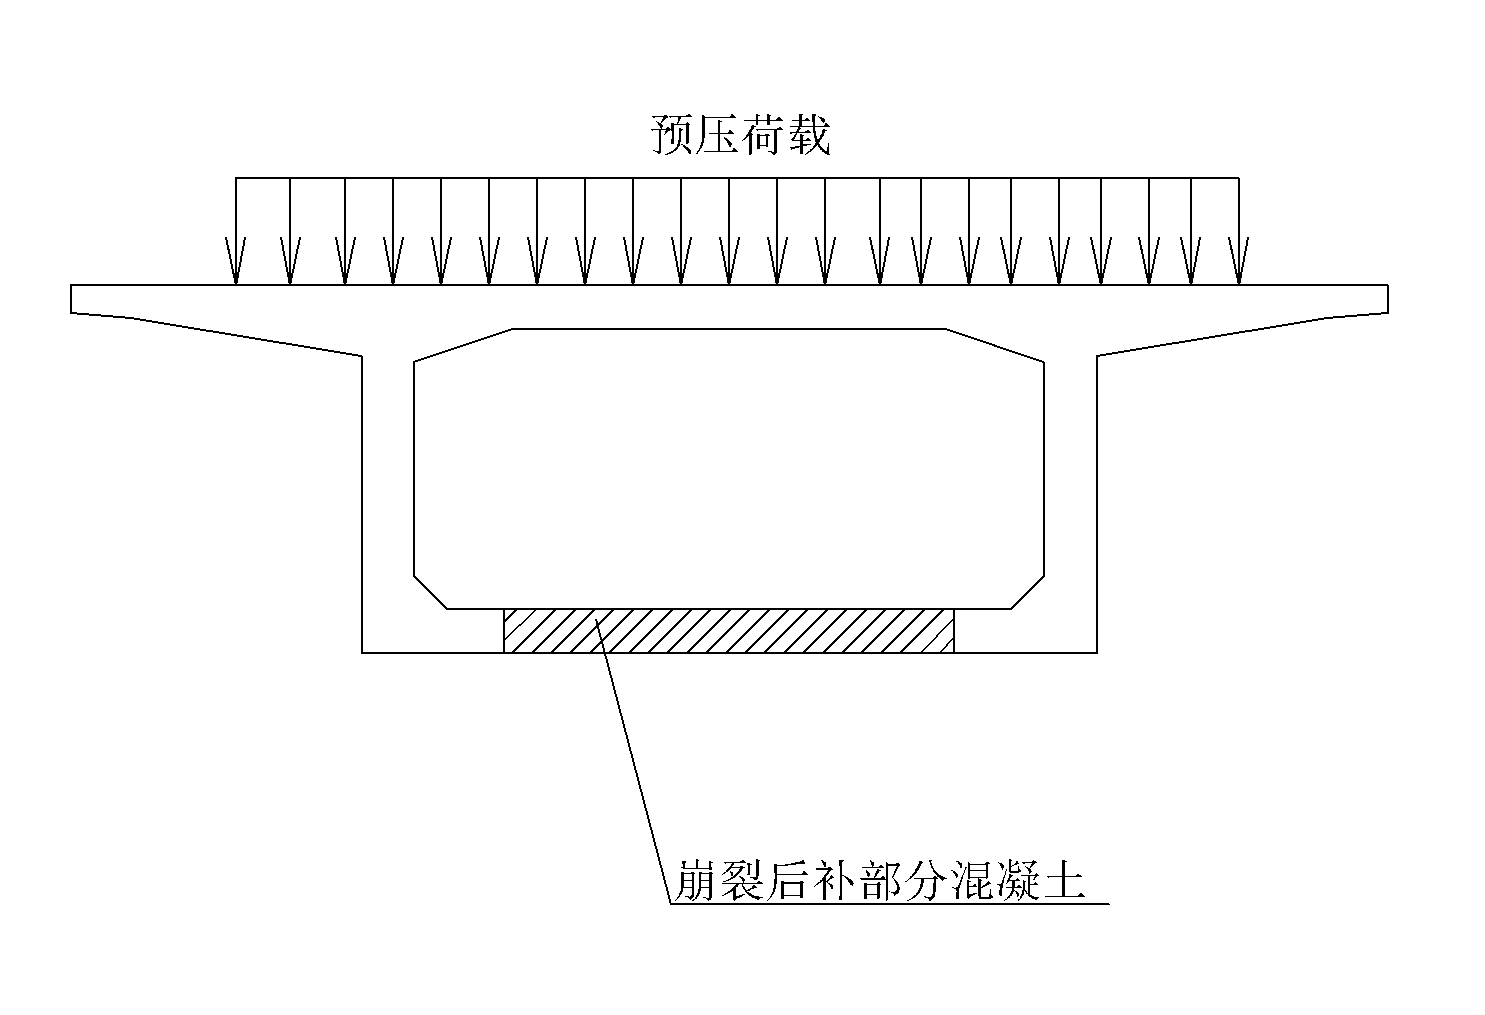 Reinforcement method for pre-stress continuous beam base plate cracks